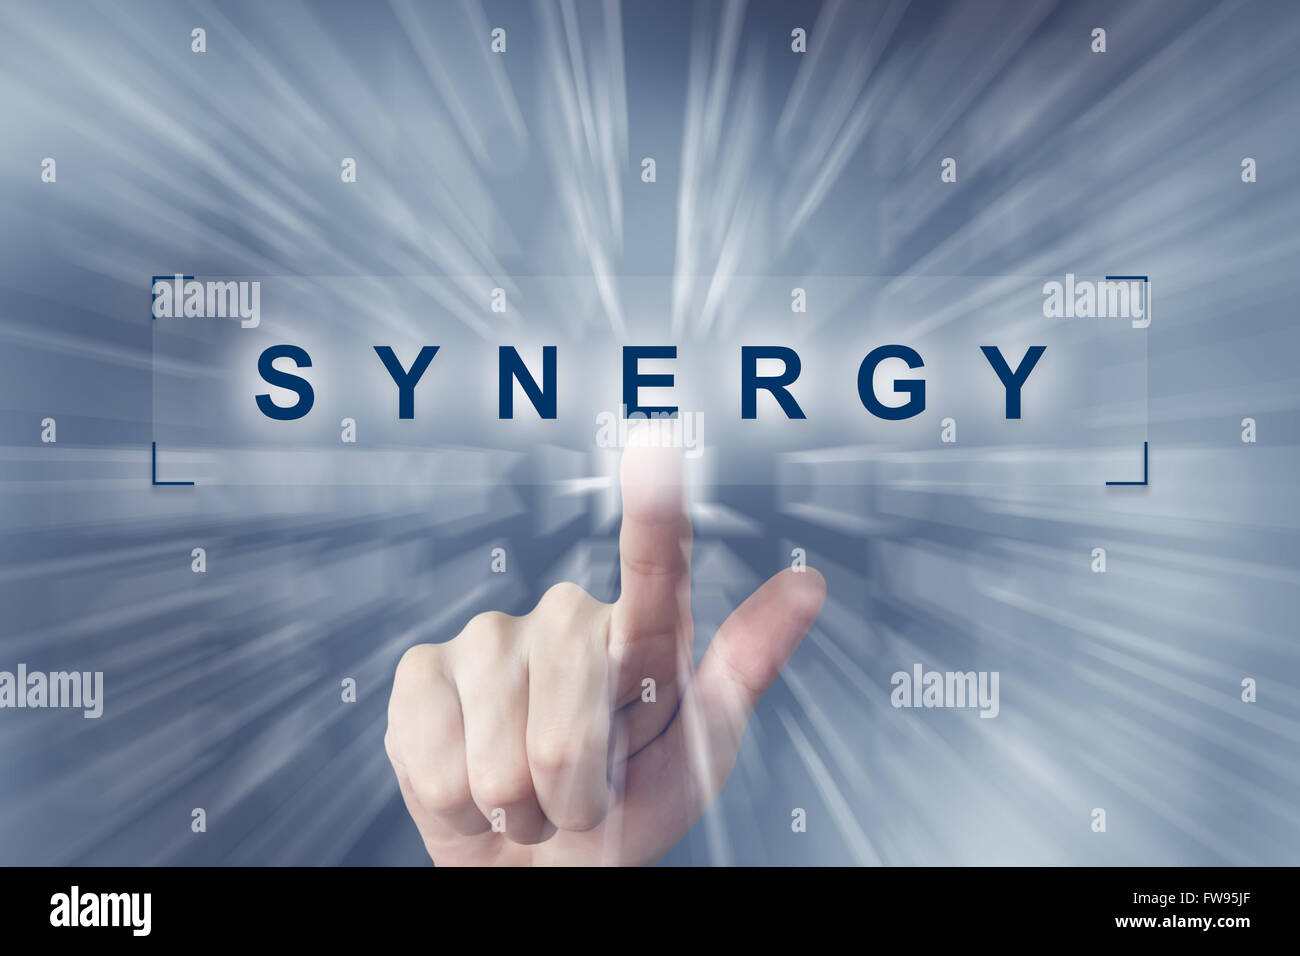 hand clicking on synergy button with zoom effect background Stock Photo